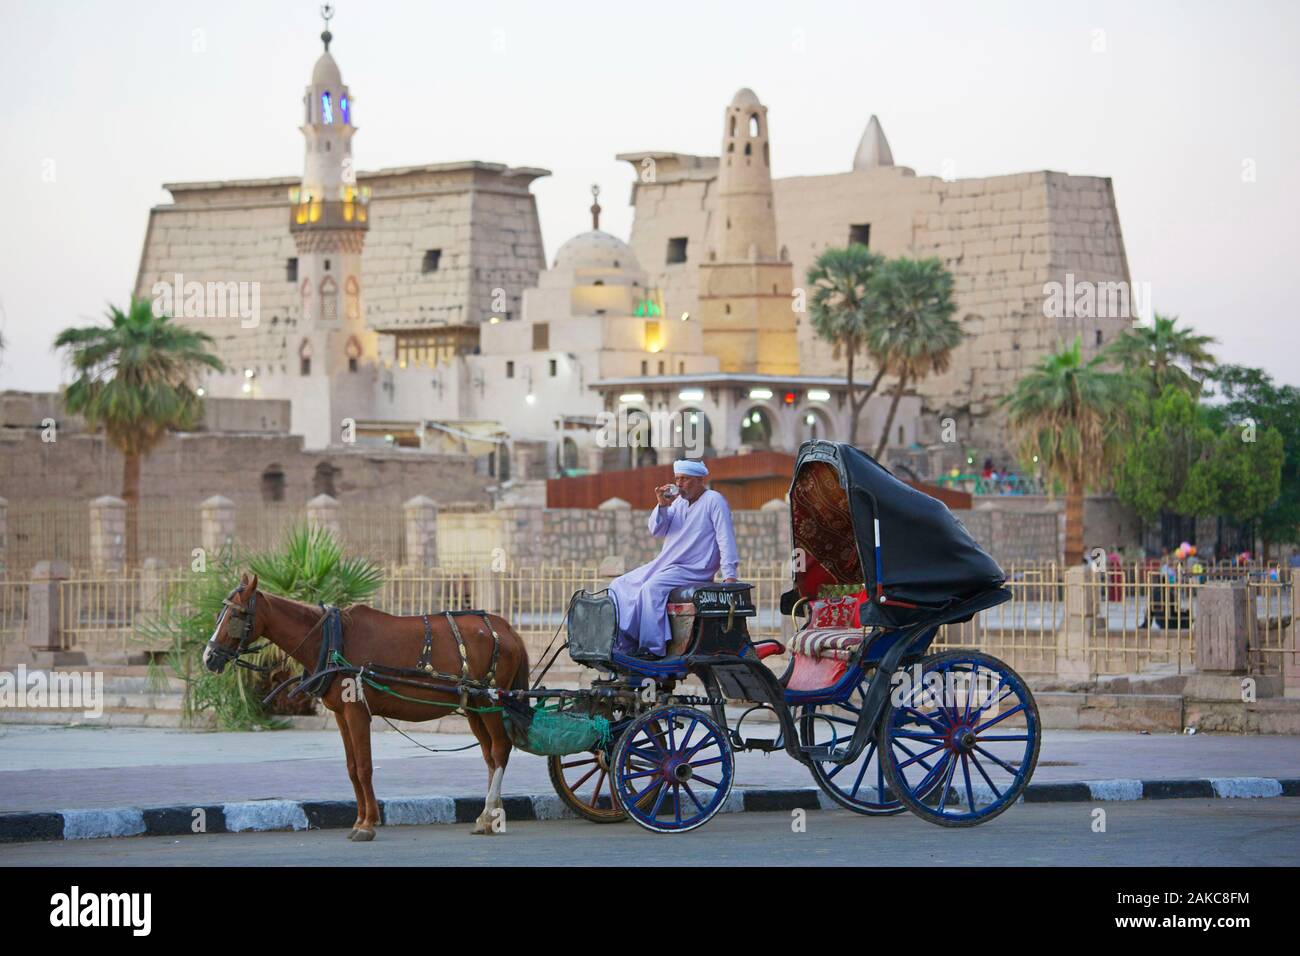 Egypt, Upper Egypt, Nile Valley, Luxor, turbaned man drinking tea on his horse carriage parked in front of Luxor Temple and Abu Haggag Mosque Stock Photo